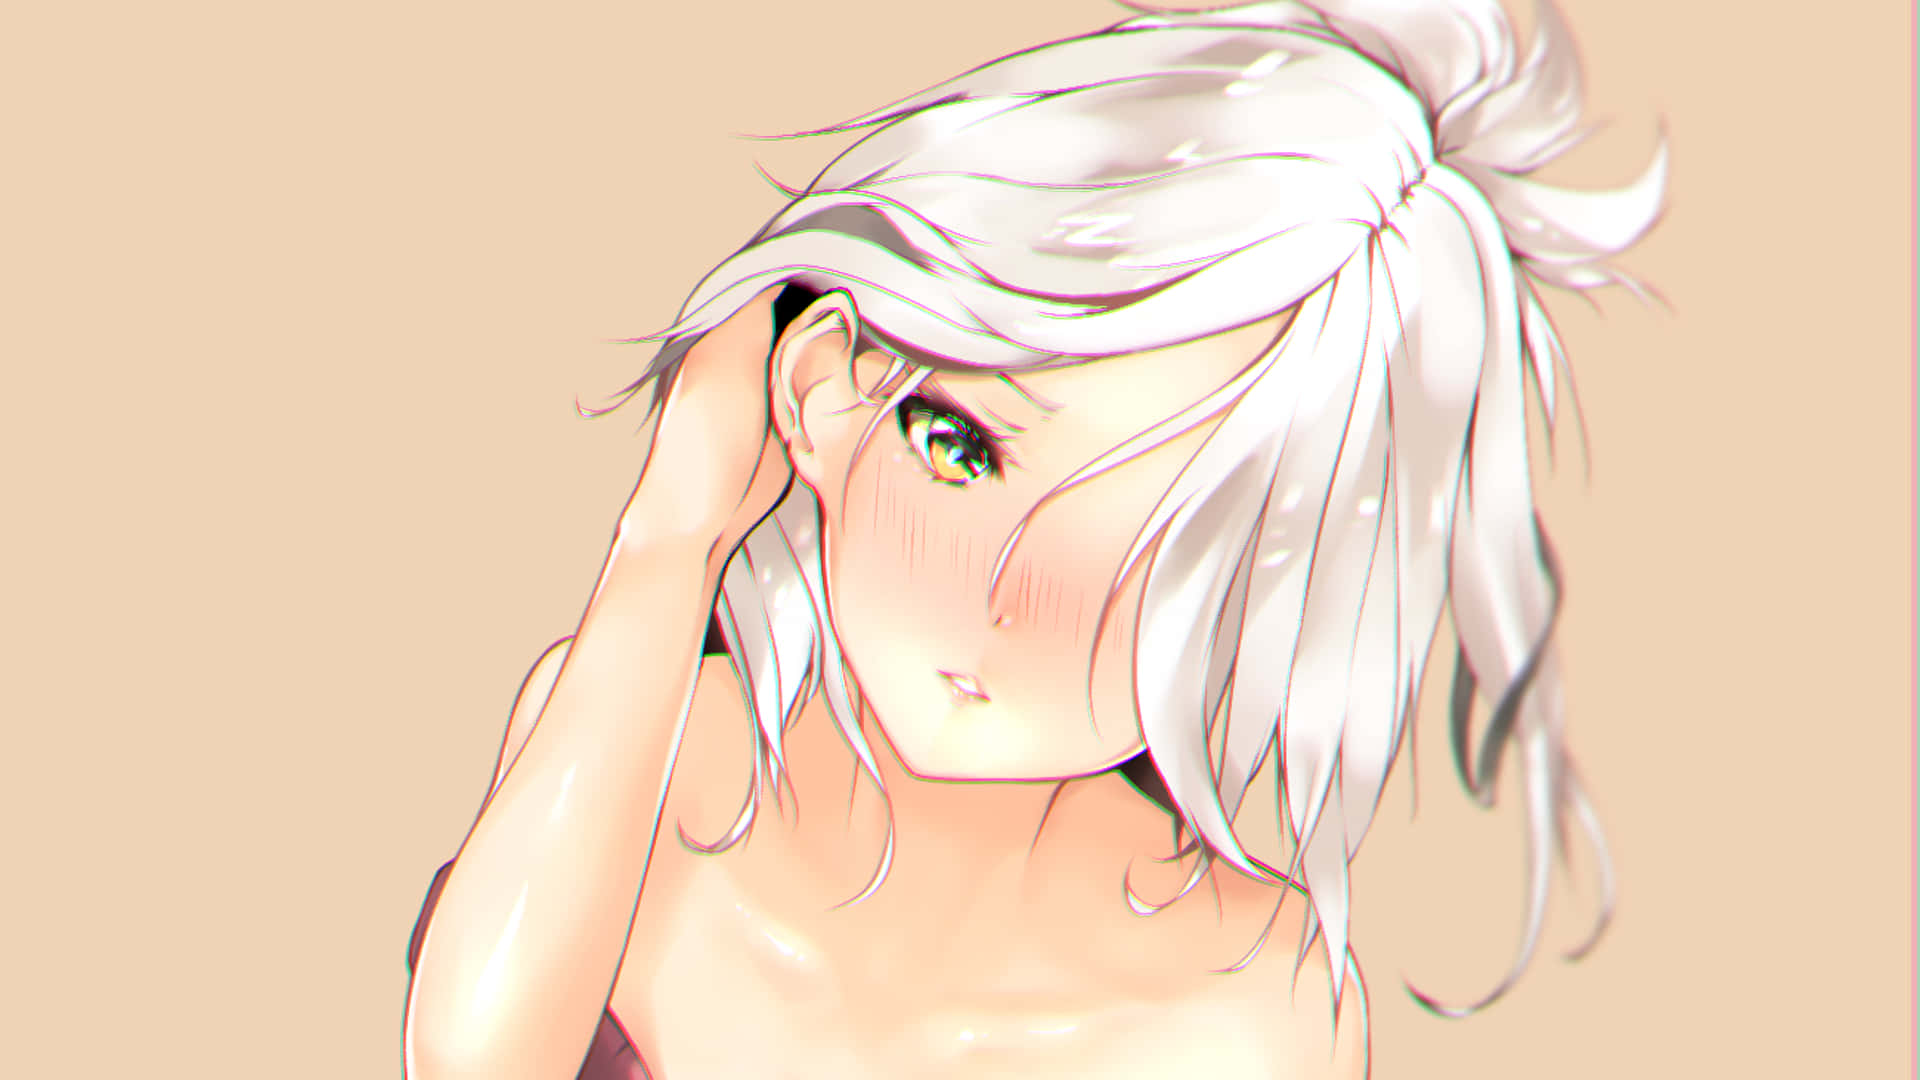 Blushing Riven From League Of Legends